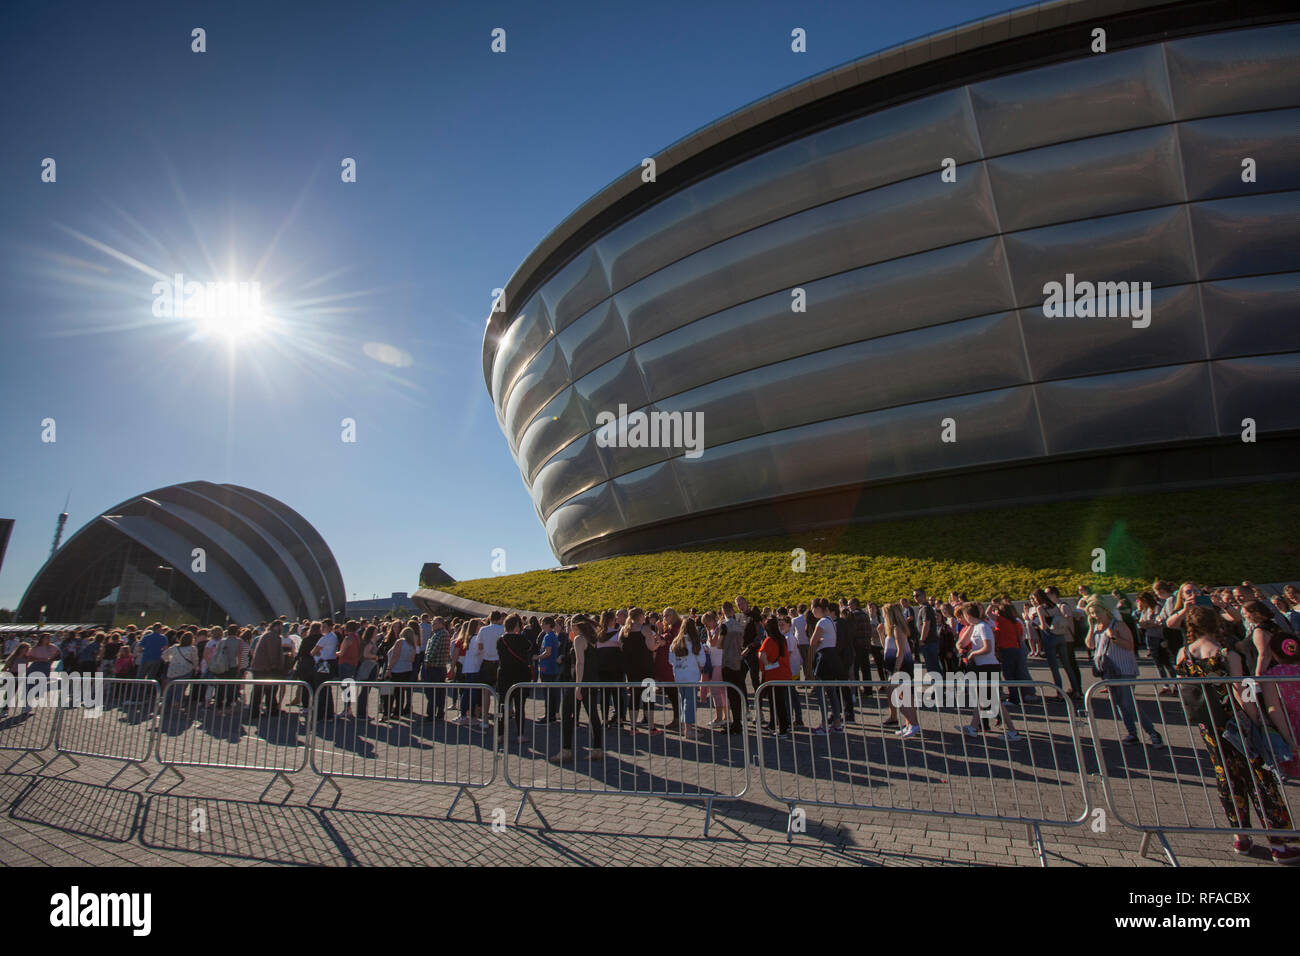 The SSE Hydro arena Stock Photo